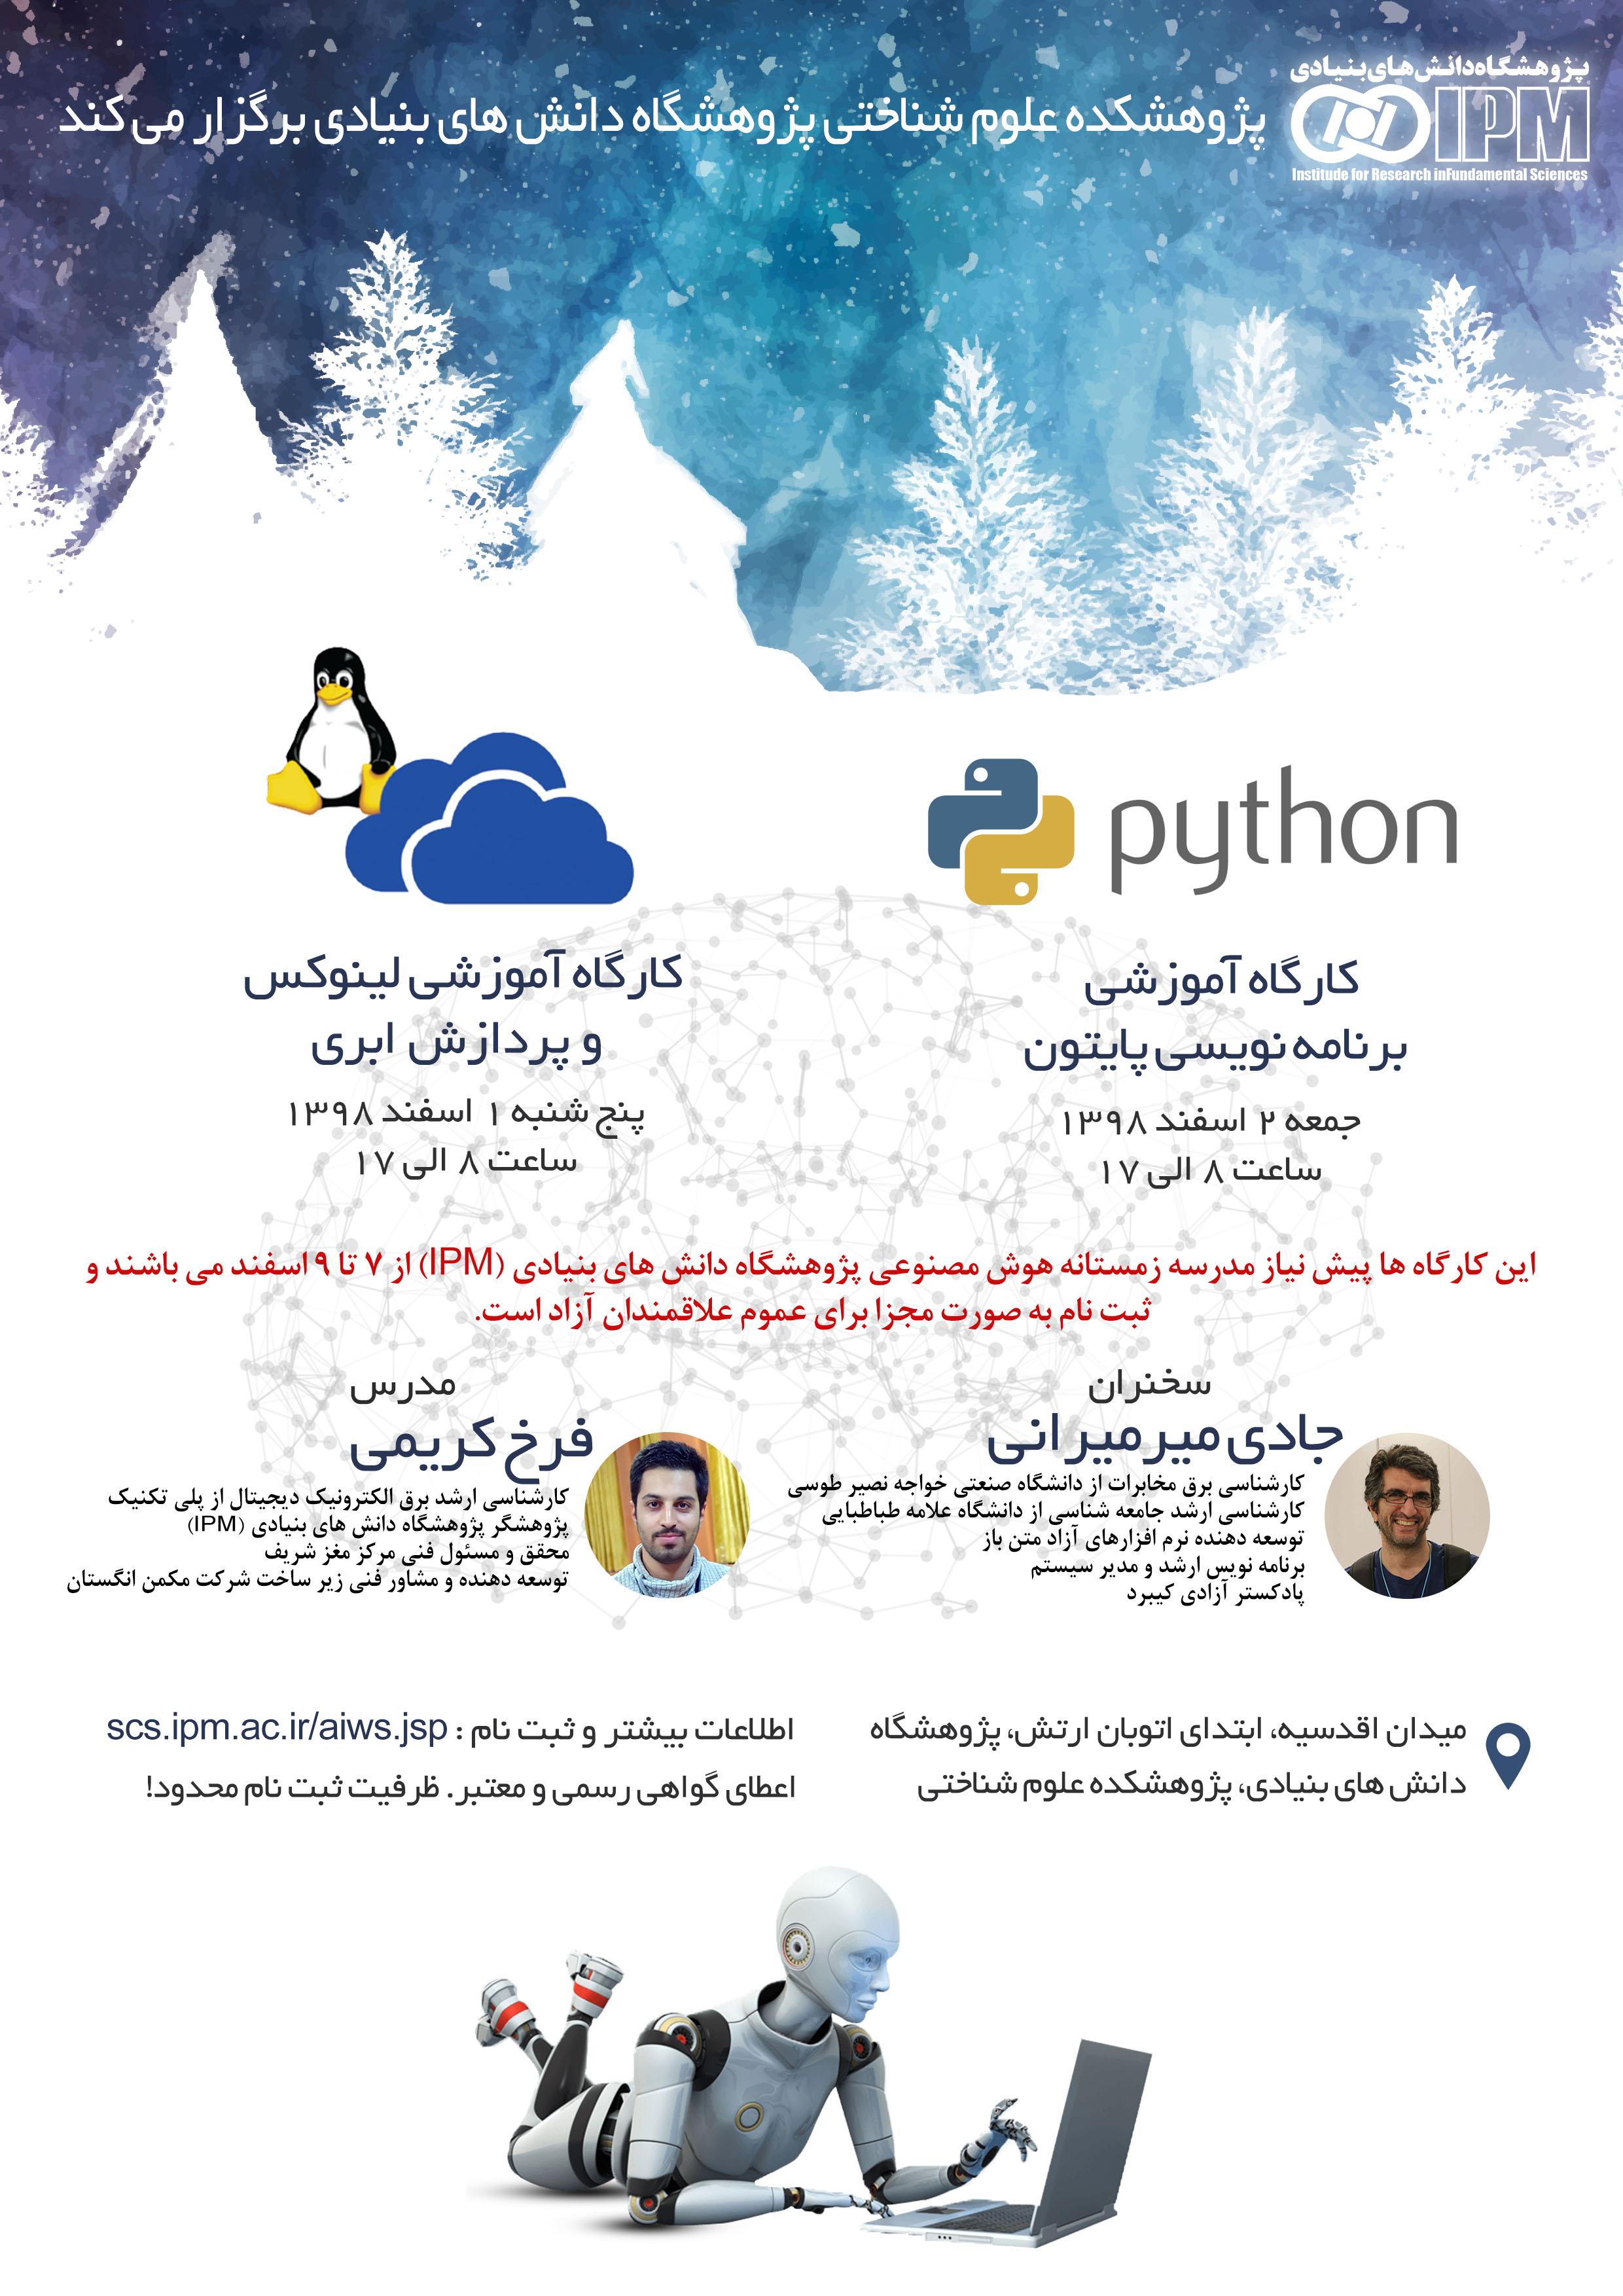 IPM Artificial Intelligence Winter School Linux and Python Workshops